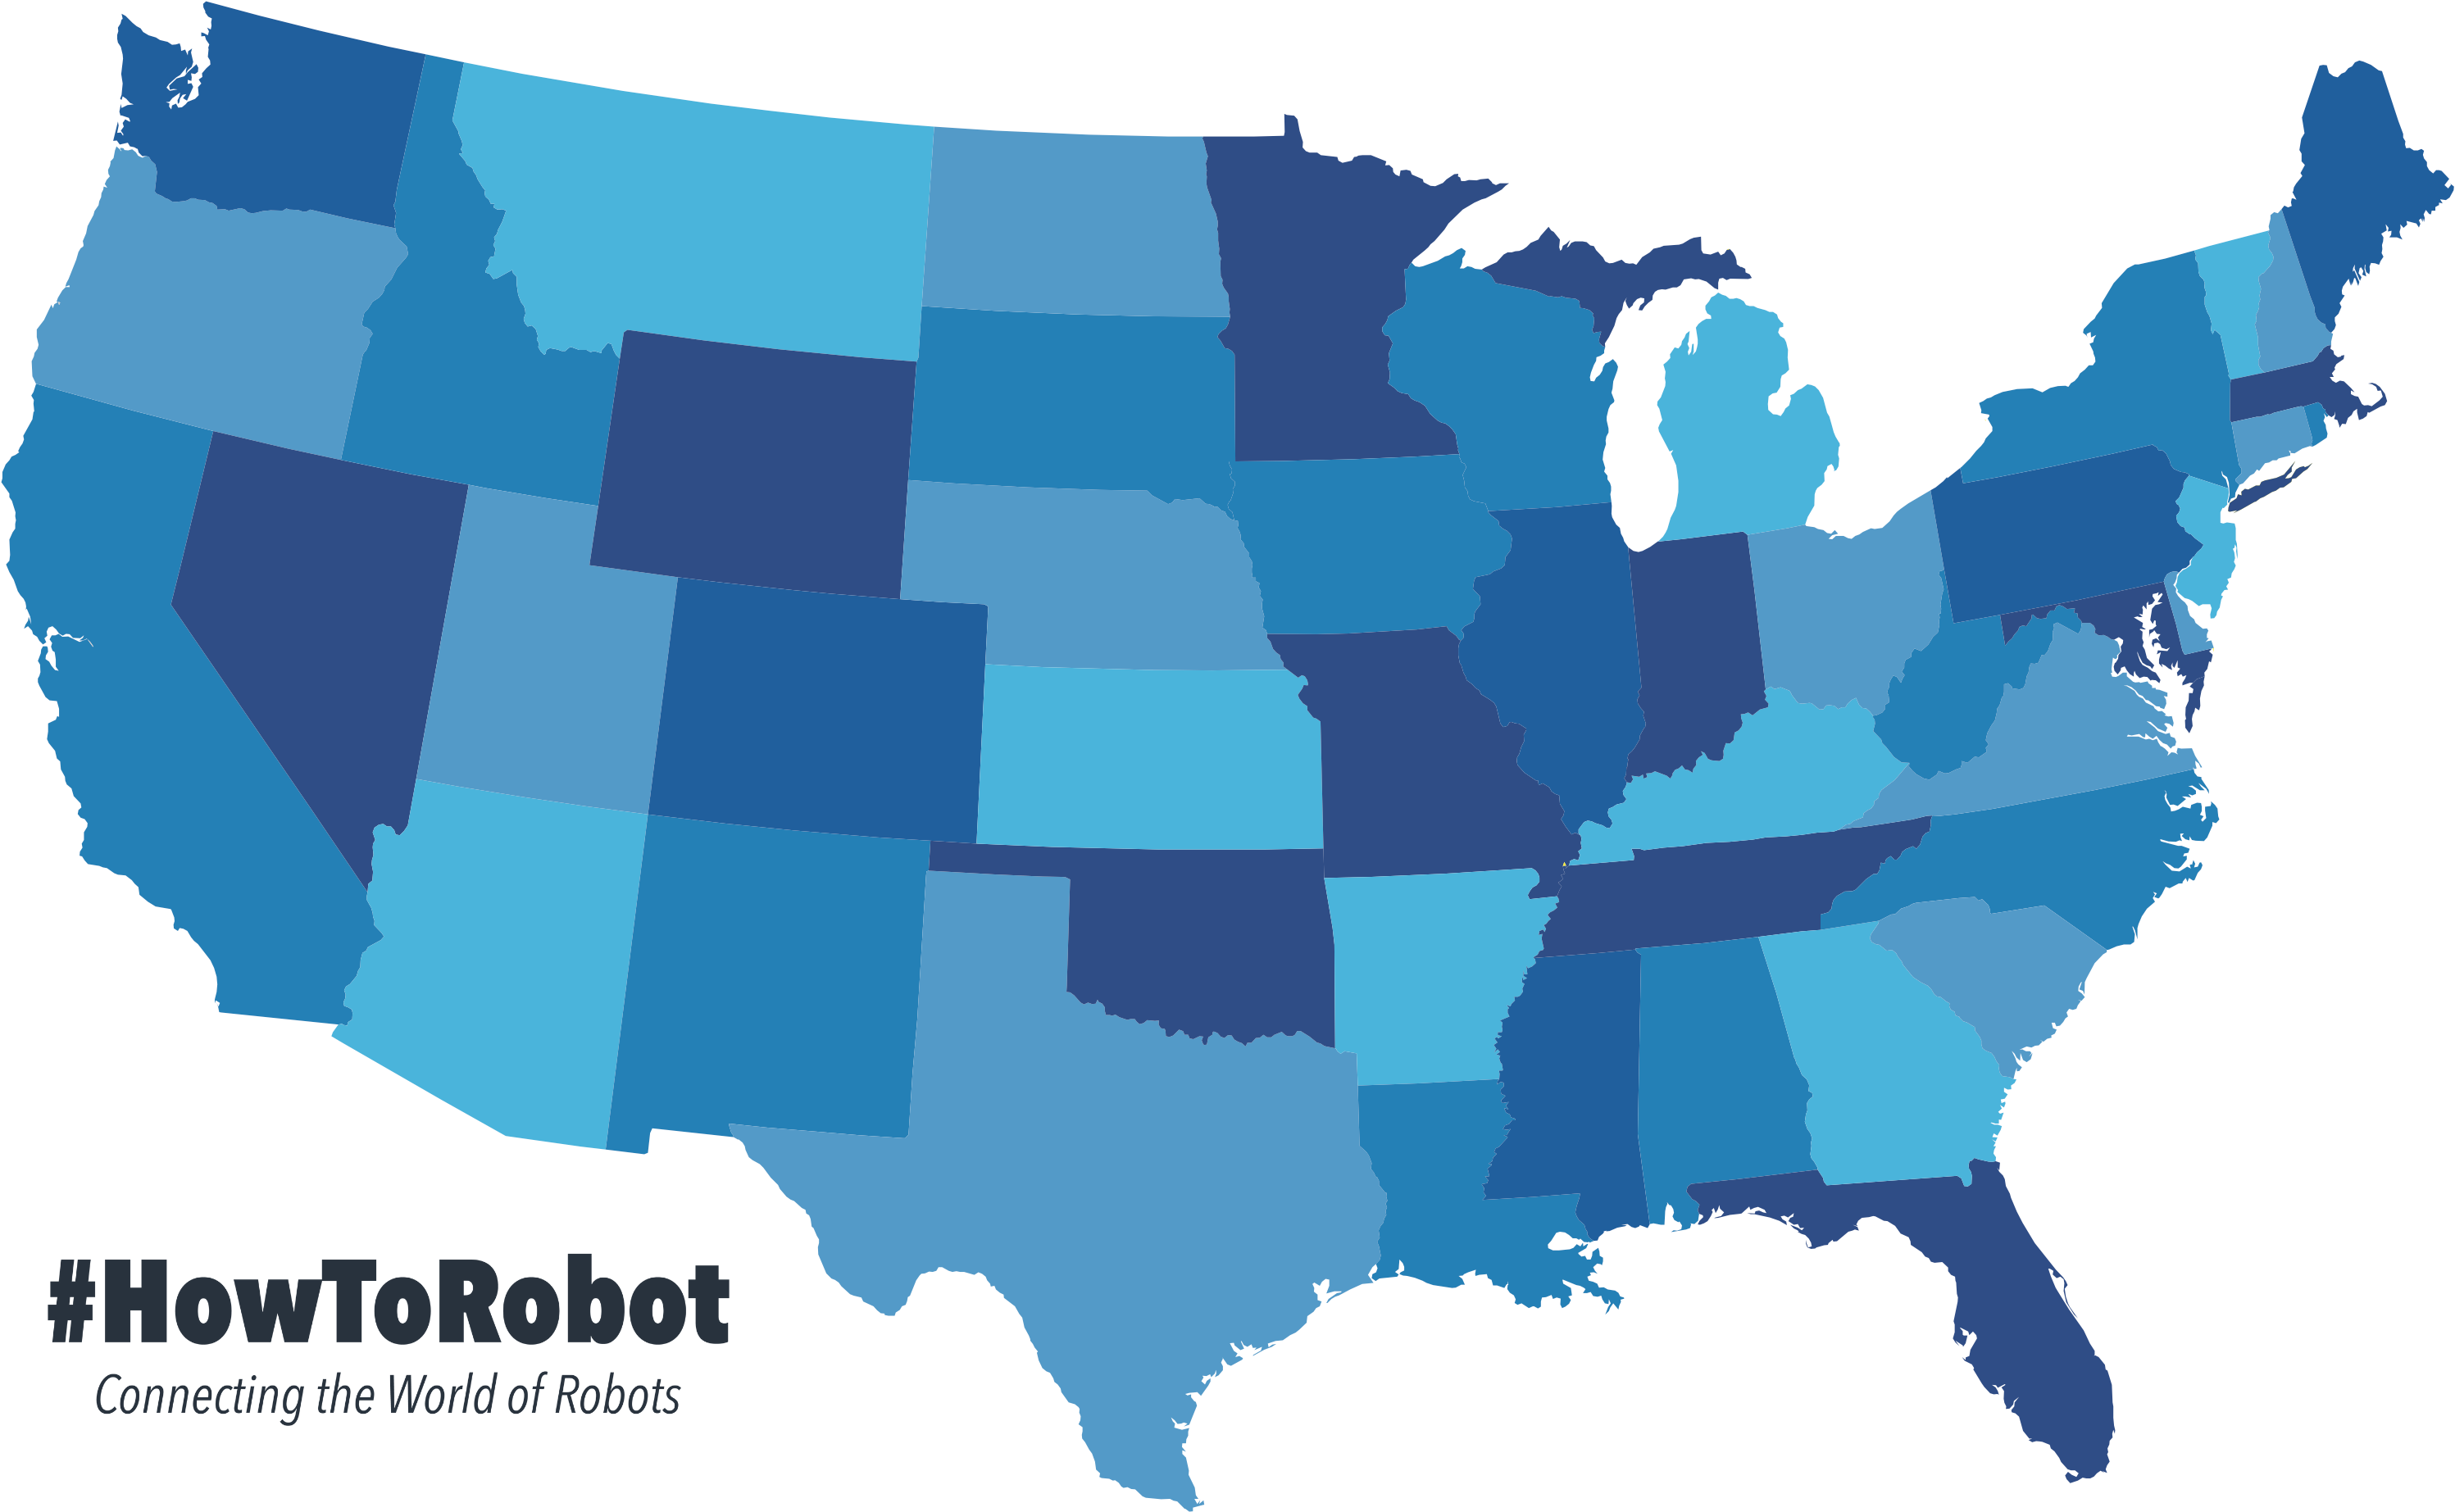 HowToRobot launches in the United States